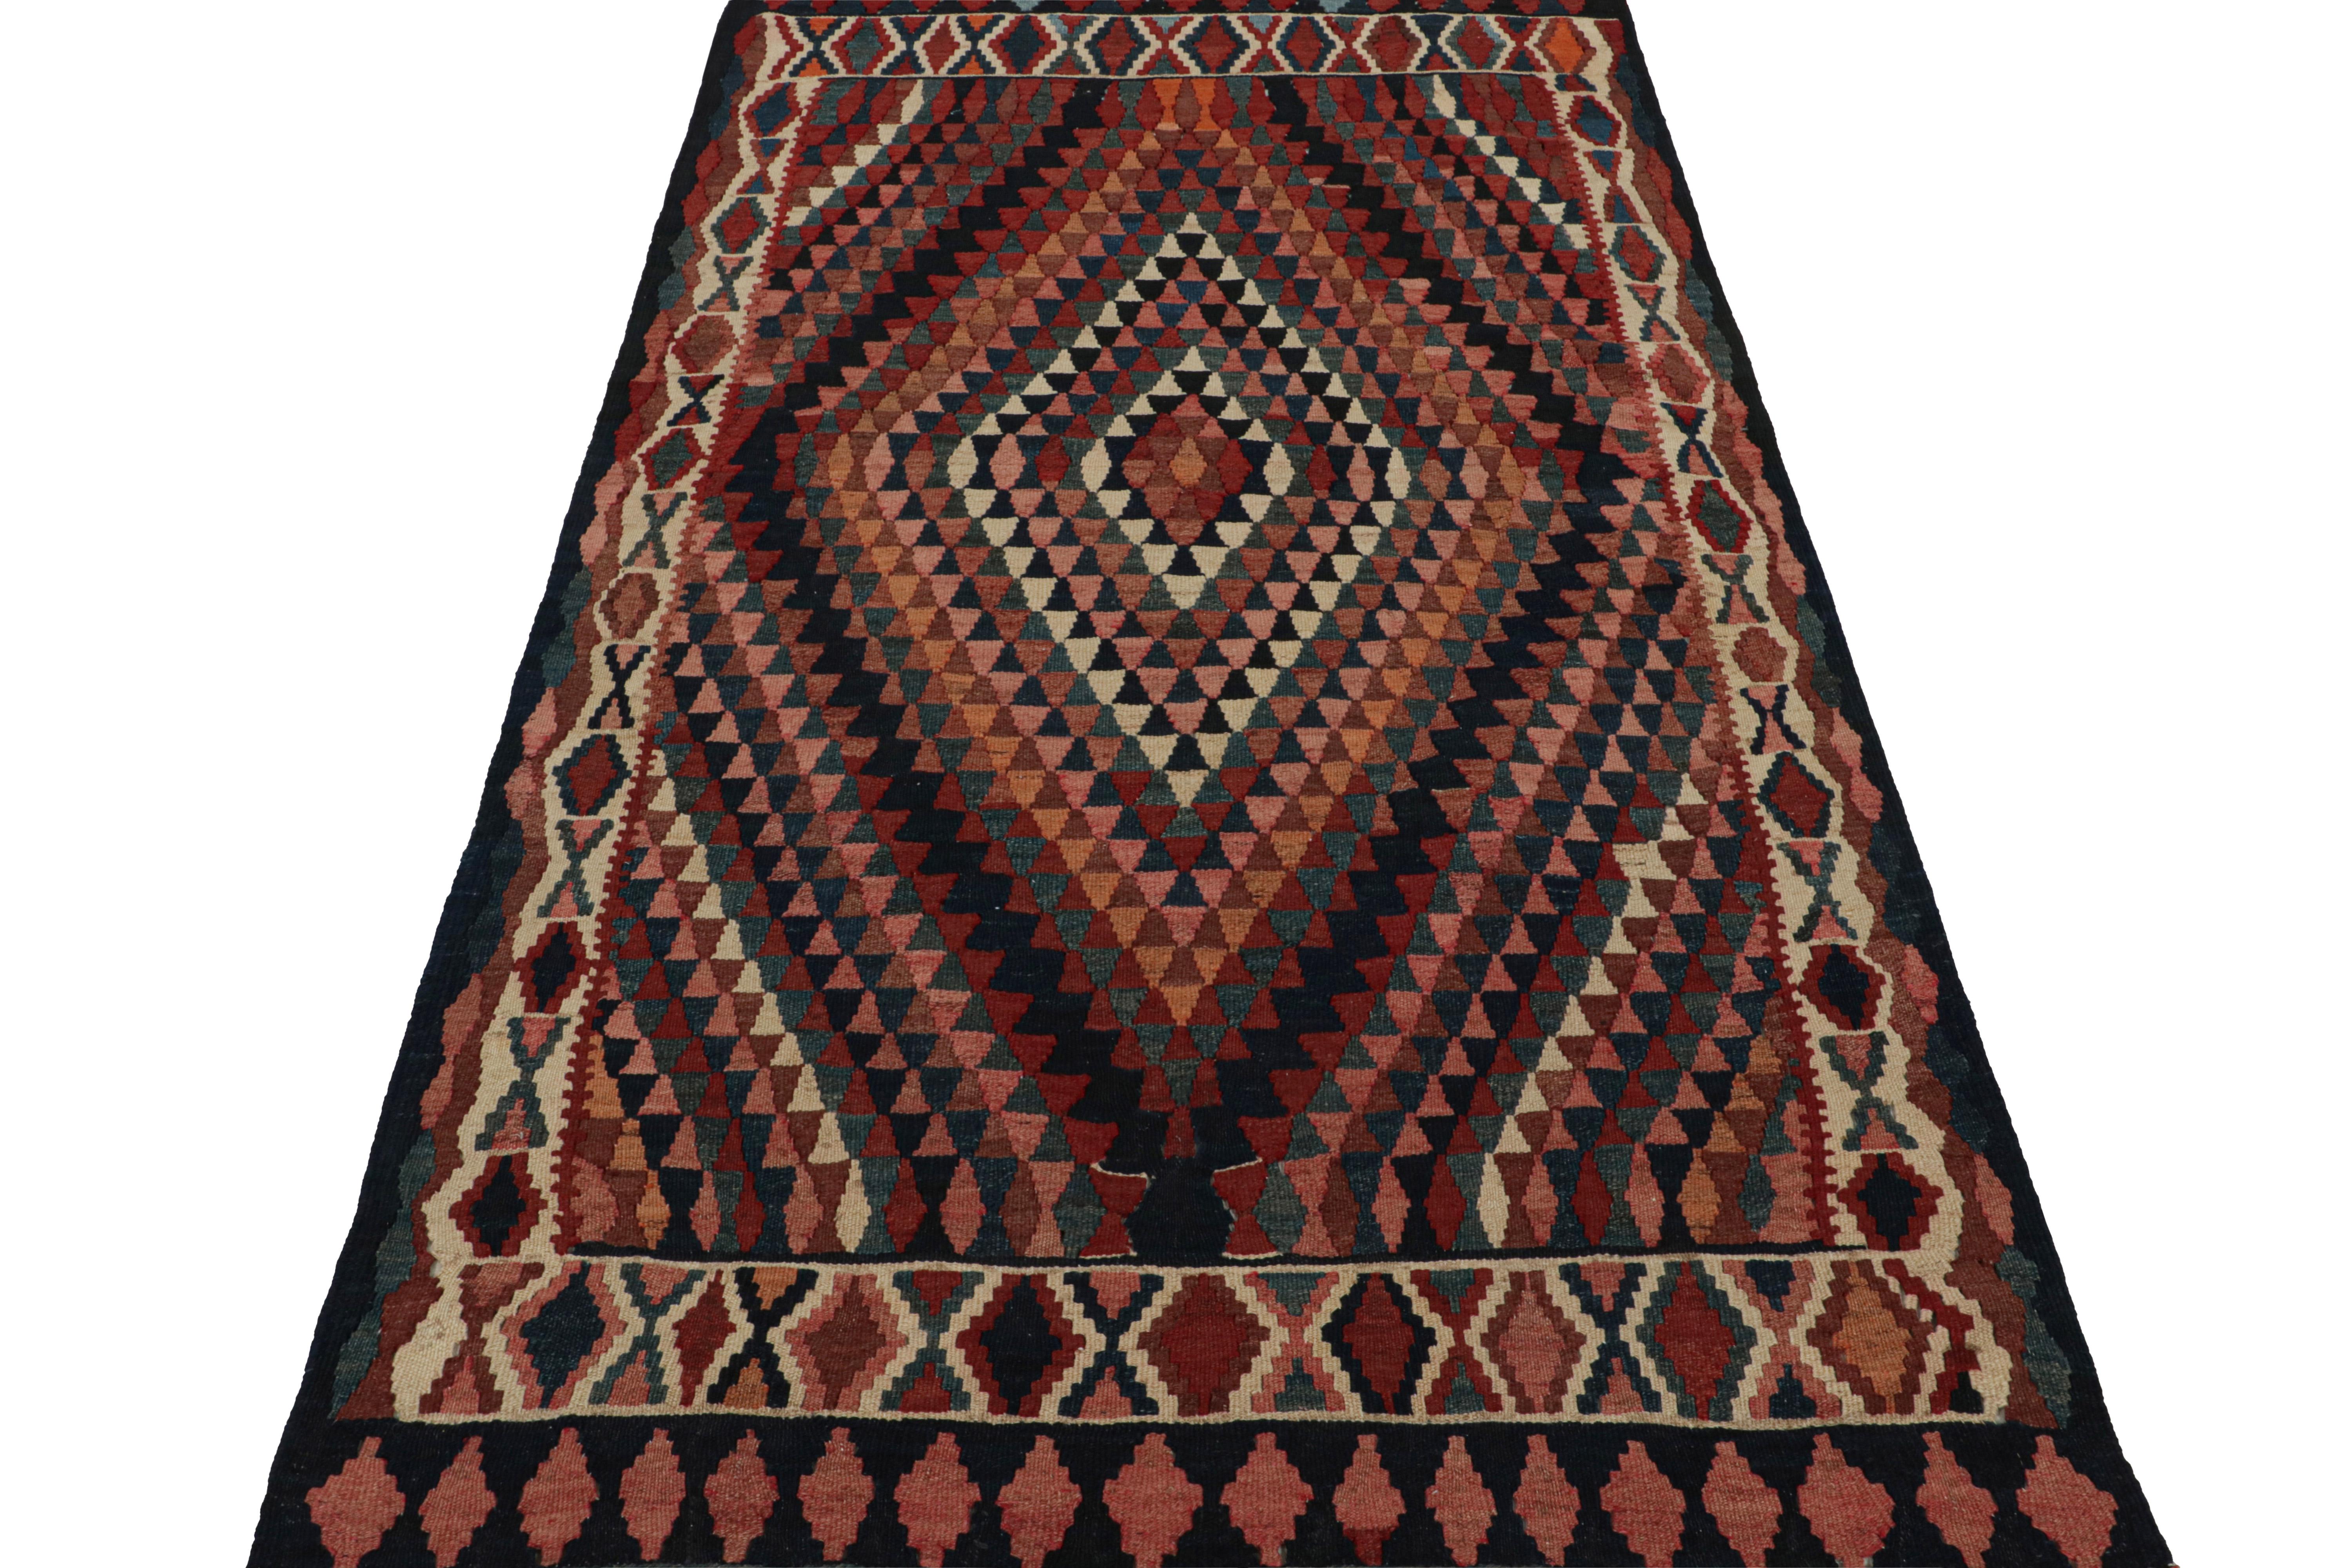 Hand-Woven Vintage Afghan Tribal Kilim with Colorful Geometric Patterns, from Rug & Kilim For Sale